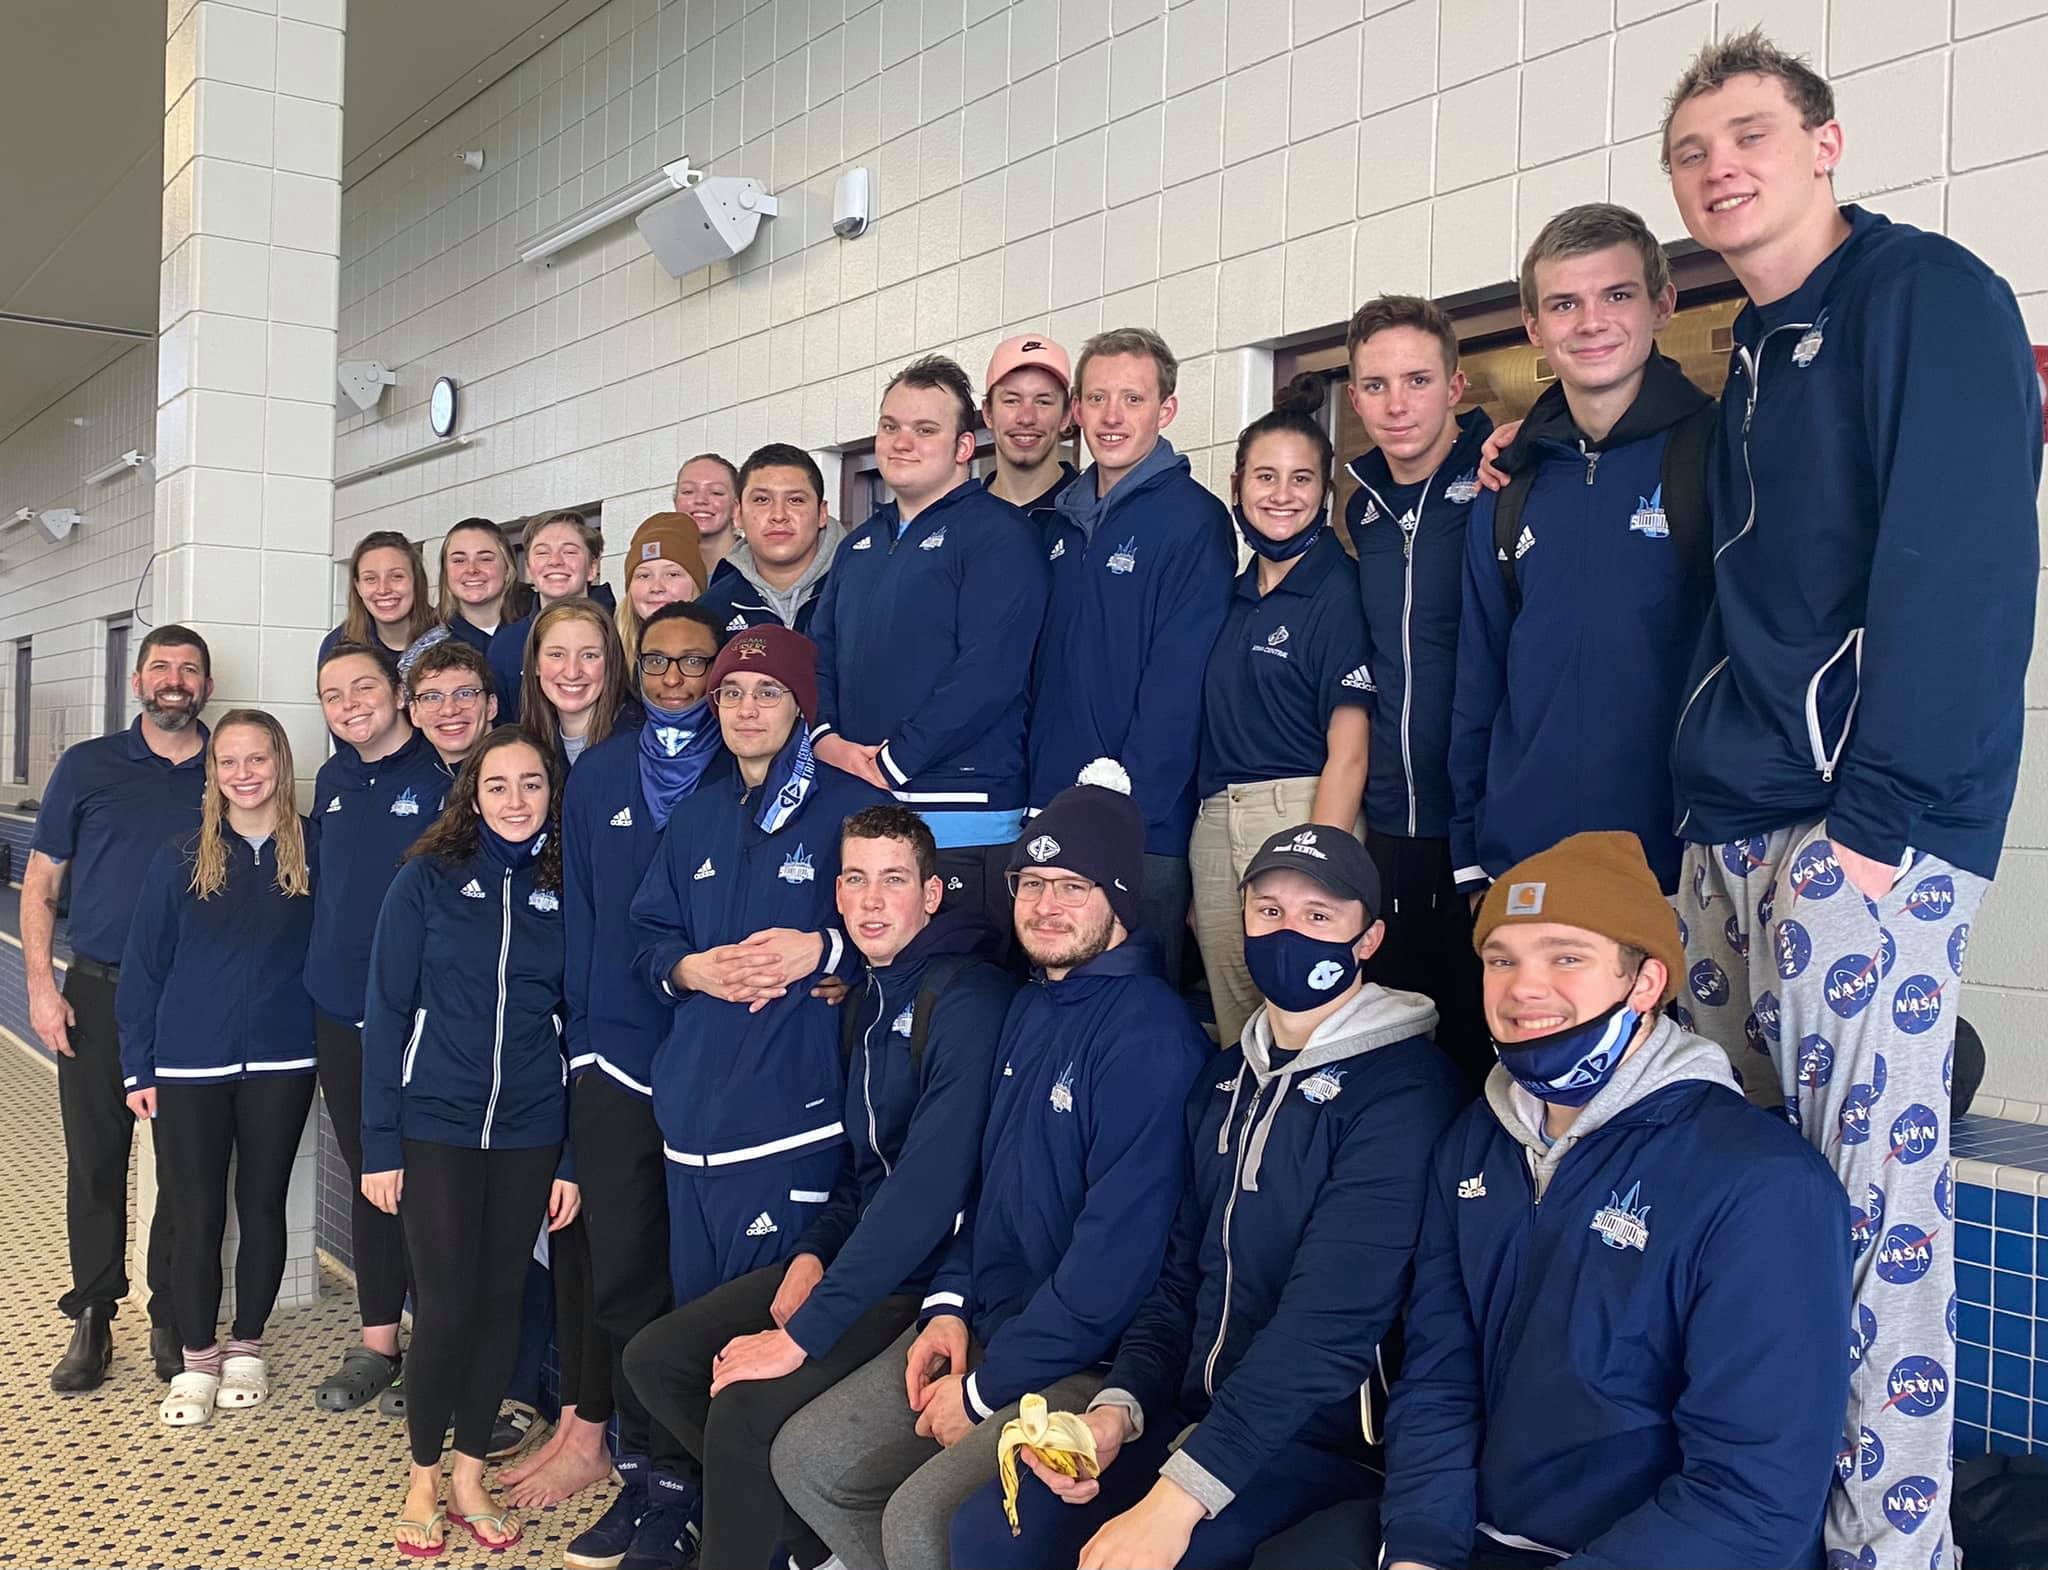 Iowa Central claims six events to finish second